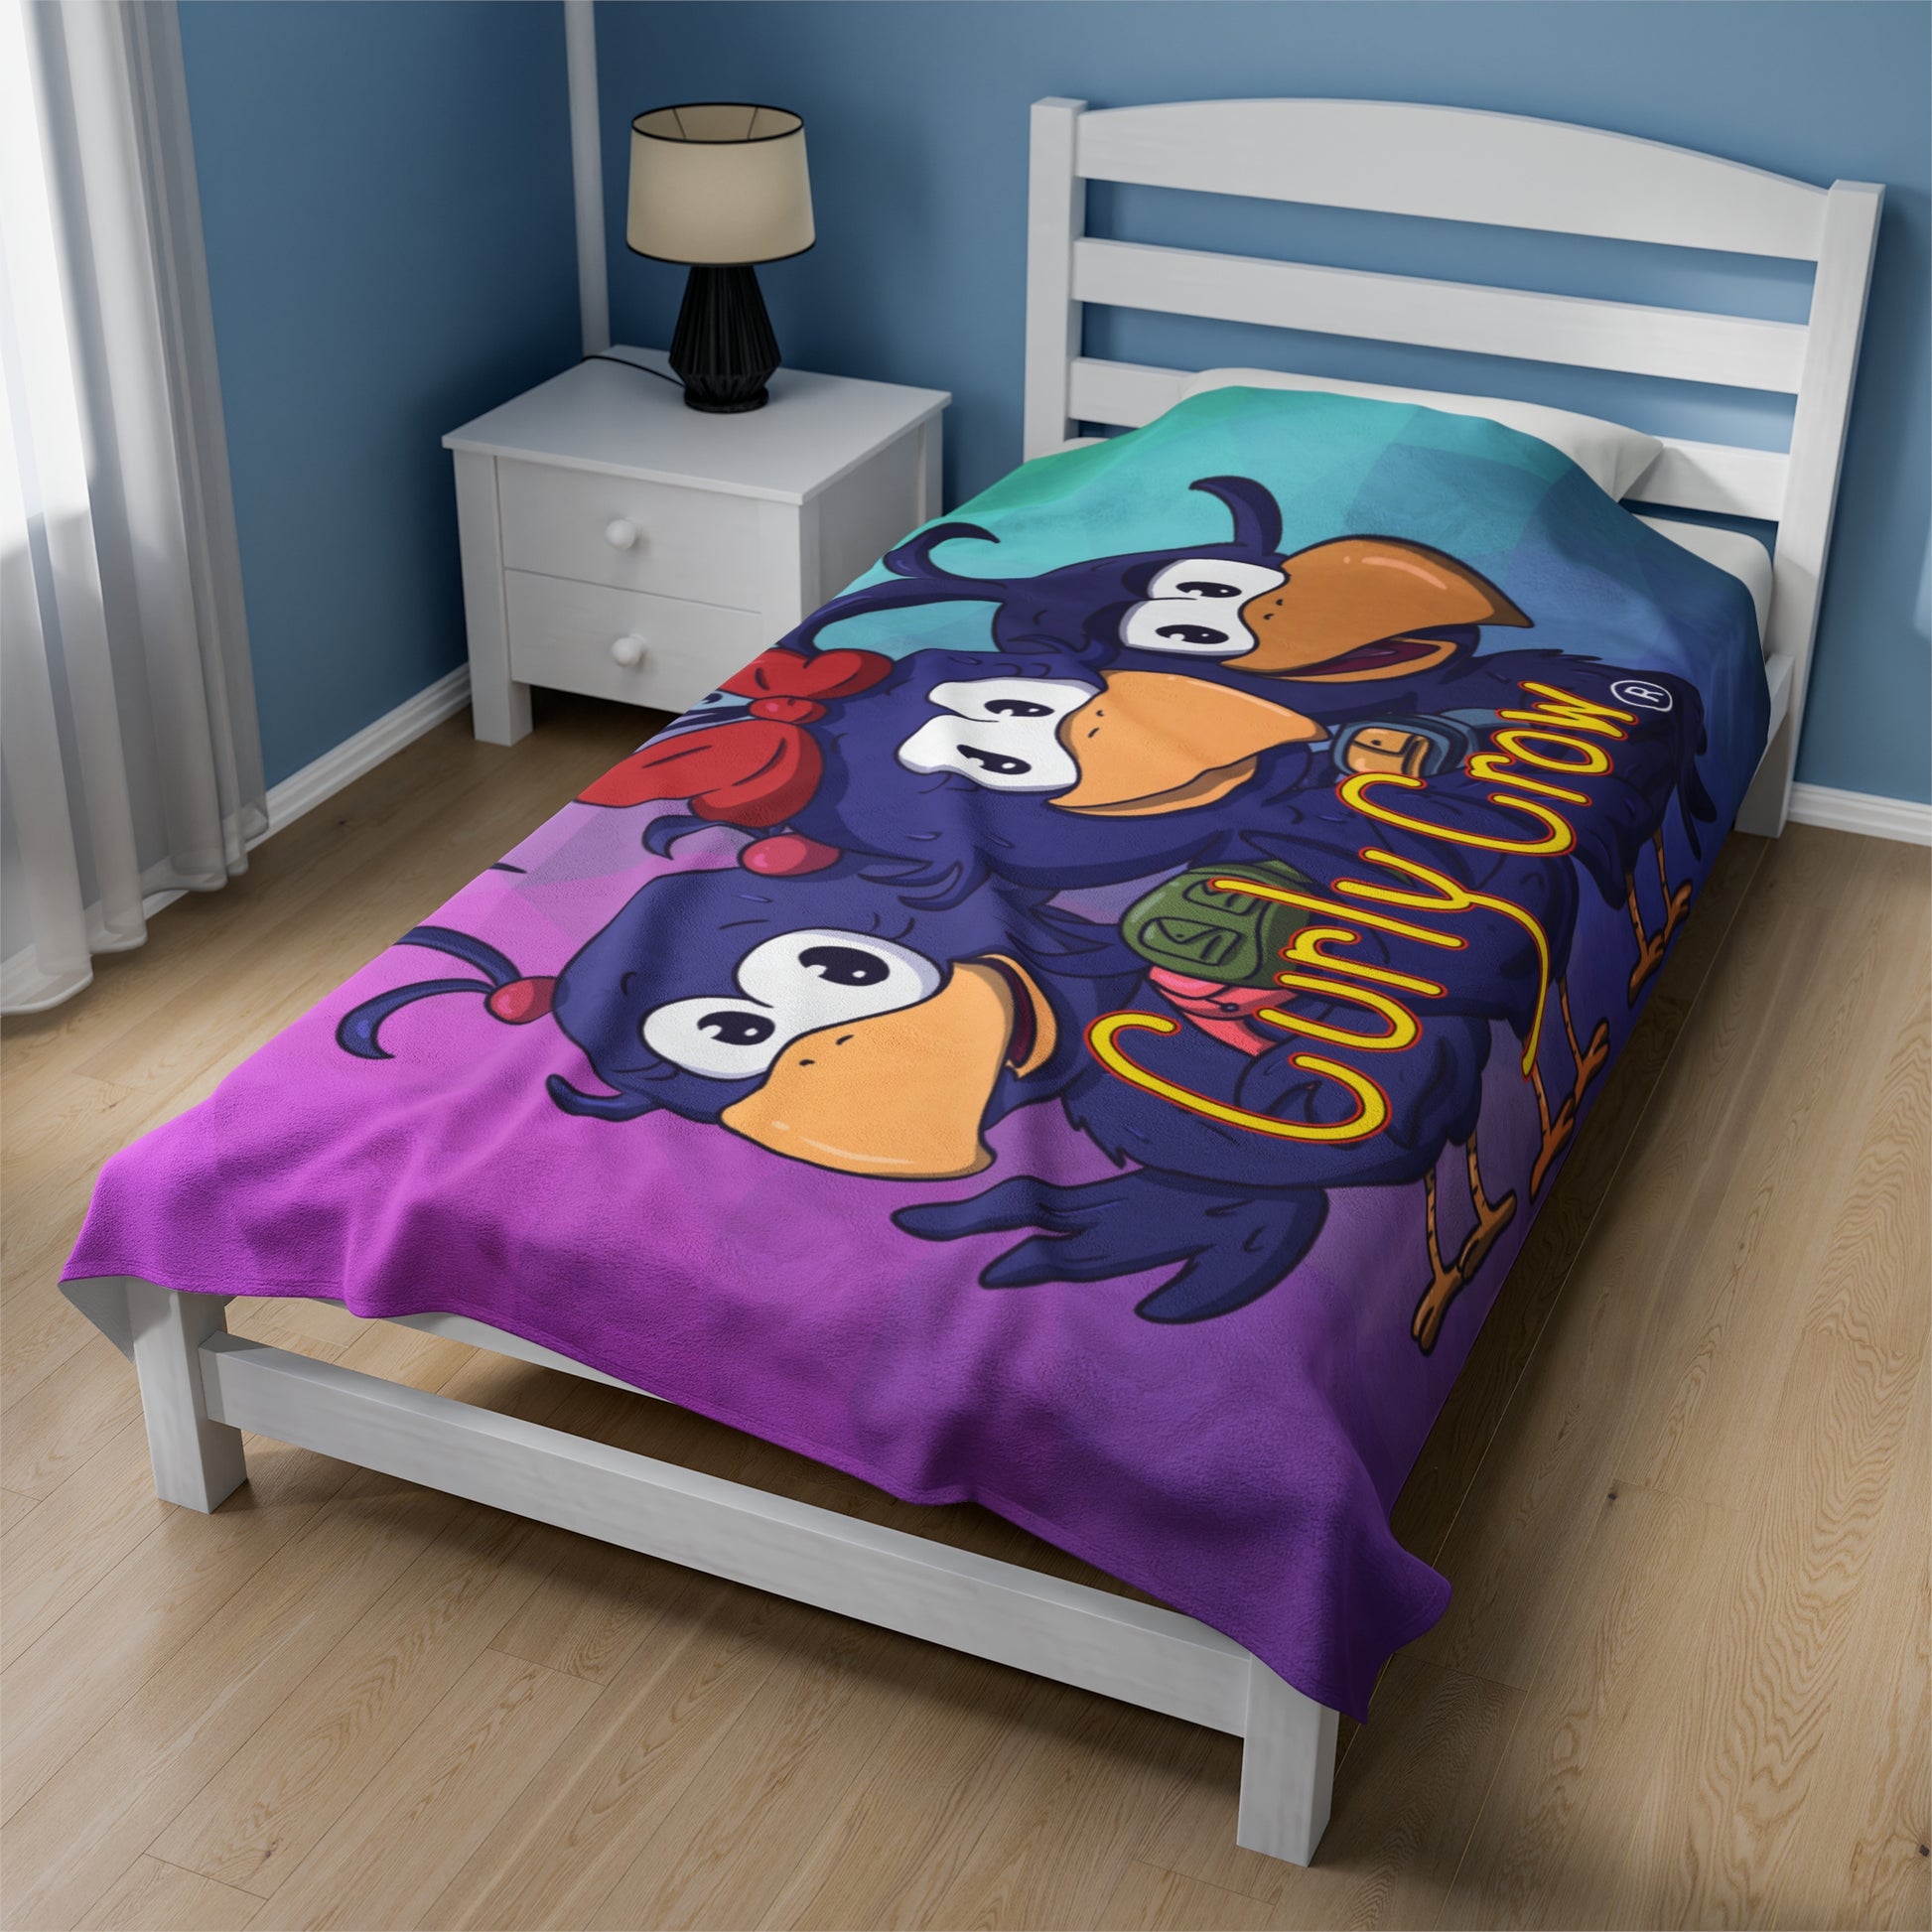 Curly Crow kids blanket on twin bed for kids